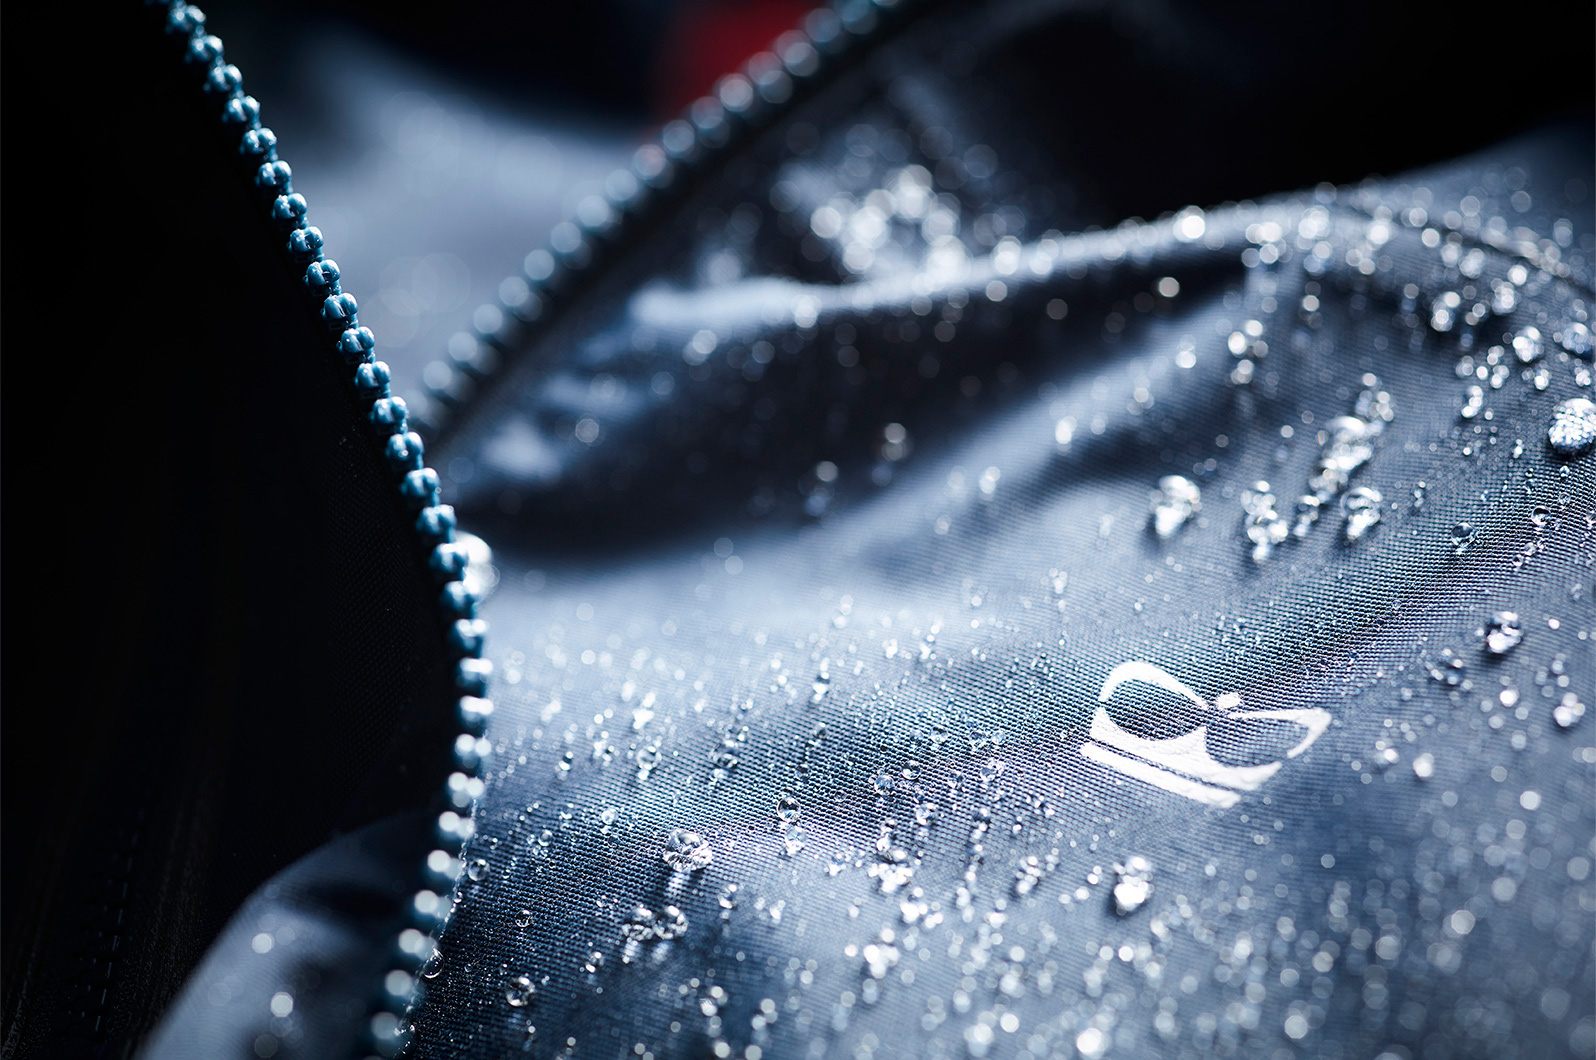 Detail image to visually convey the waterproof nature of Princess clothing.